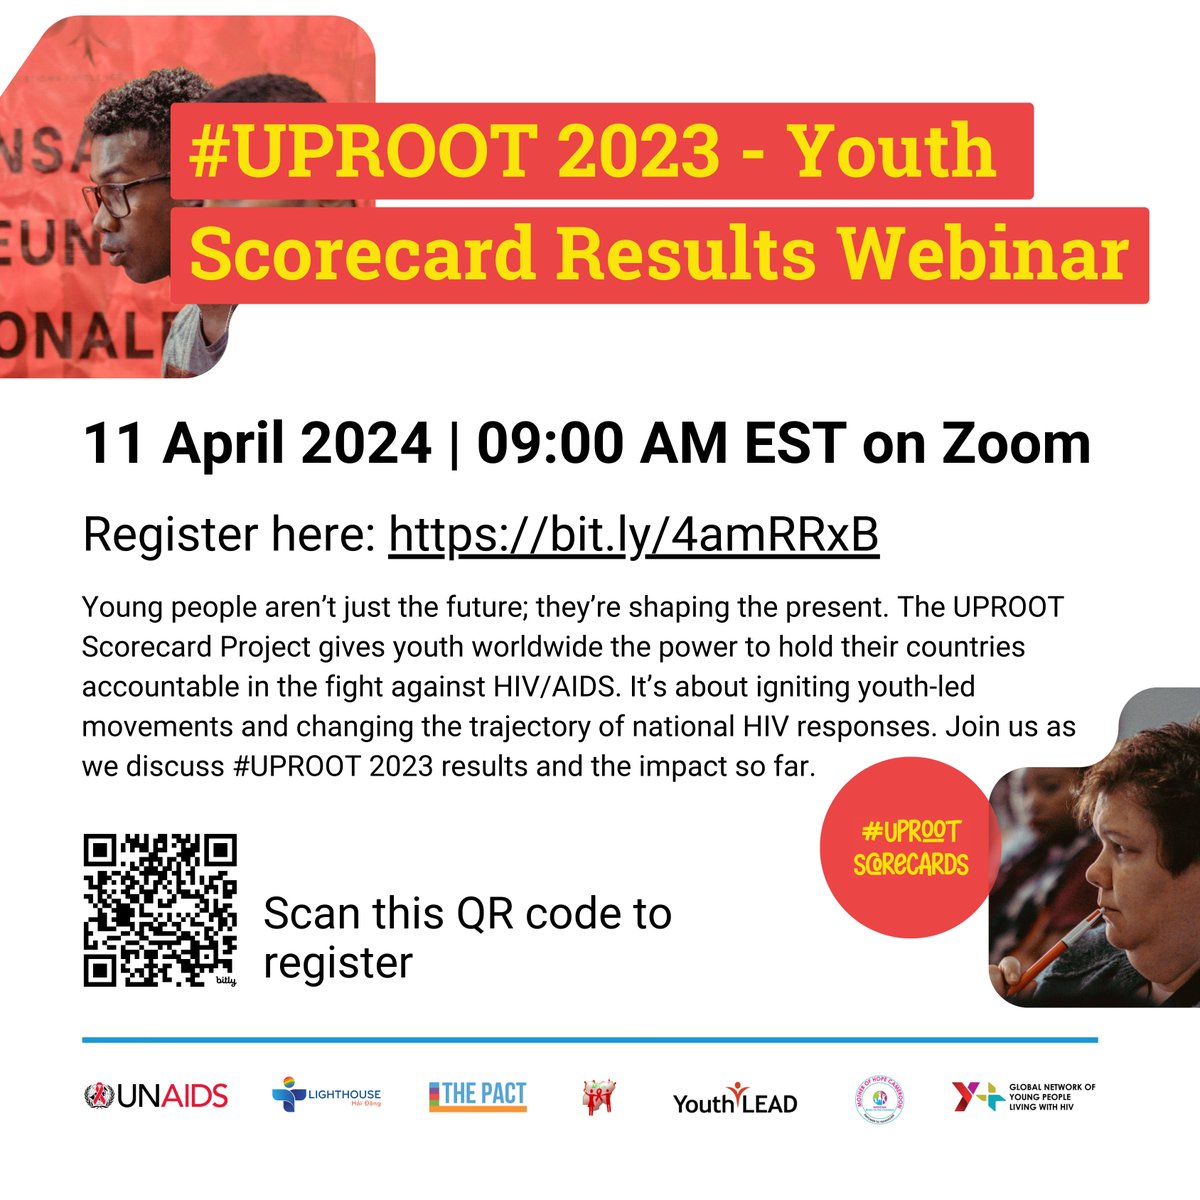 Join us on 11 April at 09:00 (EST)/ 15:00 (CEST) for the #UPROOT2023 showcase webinar. Learn from country networks that implemented the UPROOT scorecard in 2023 and those that conducted advocacy based on results. Register now 👉🏼 bit.ly/4amRRxB or scan the QR code!